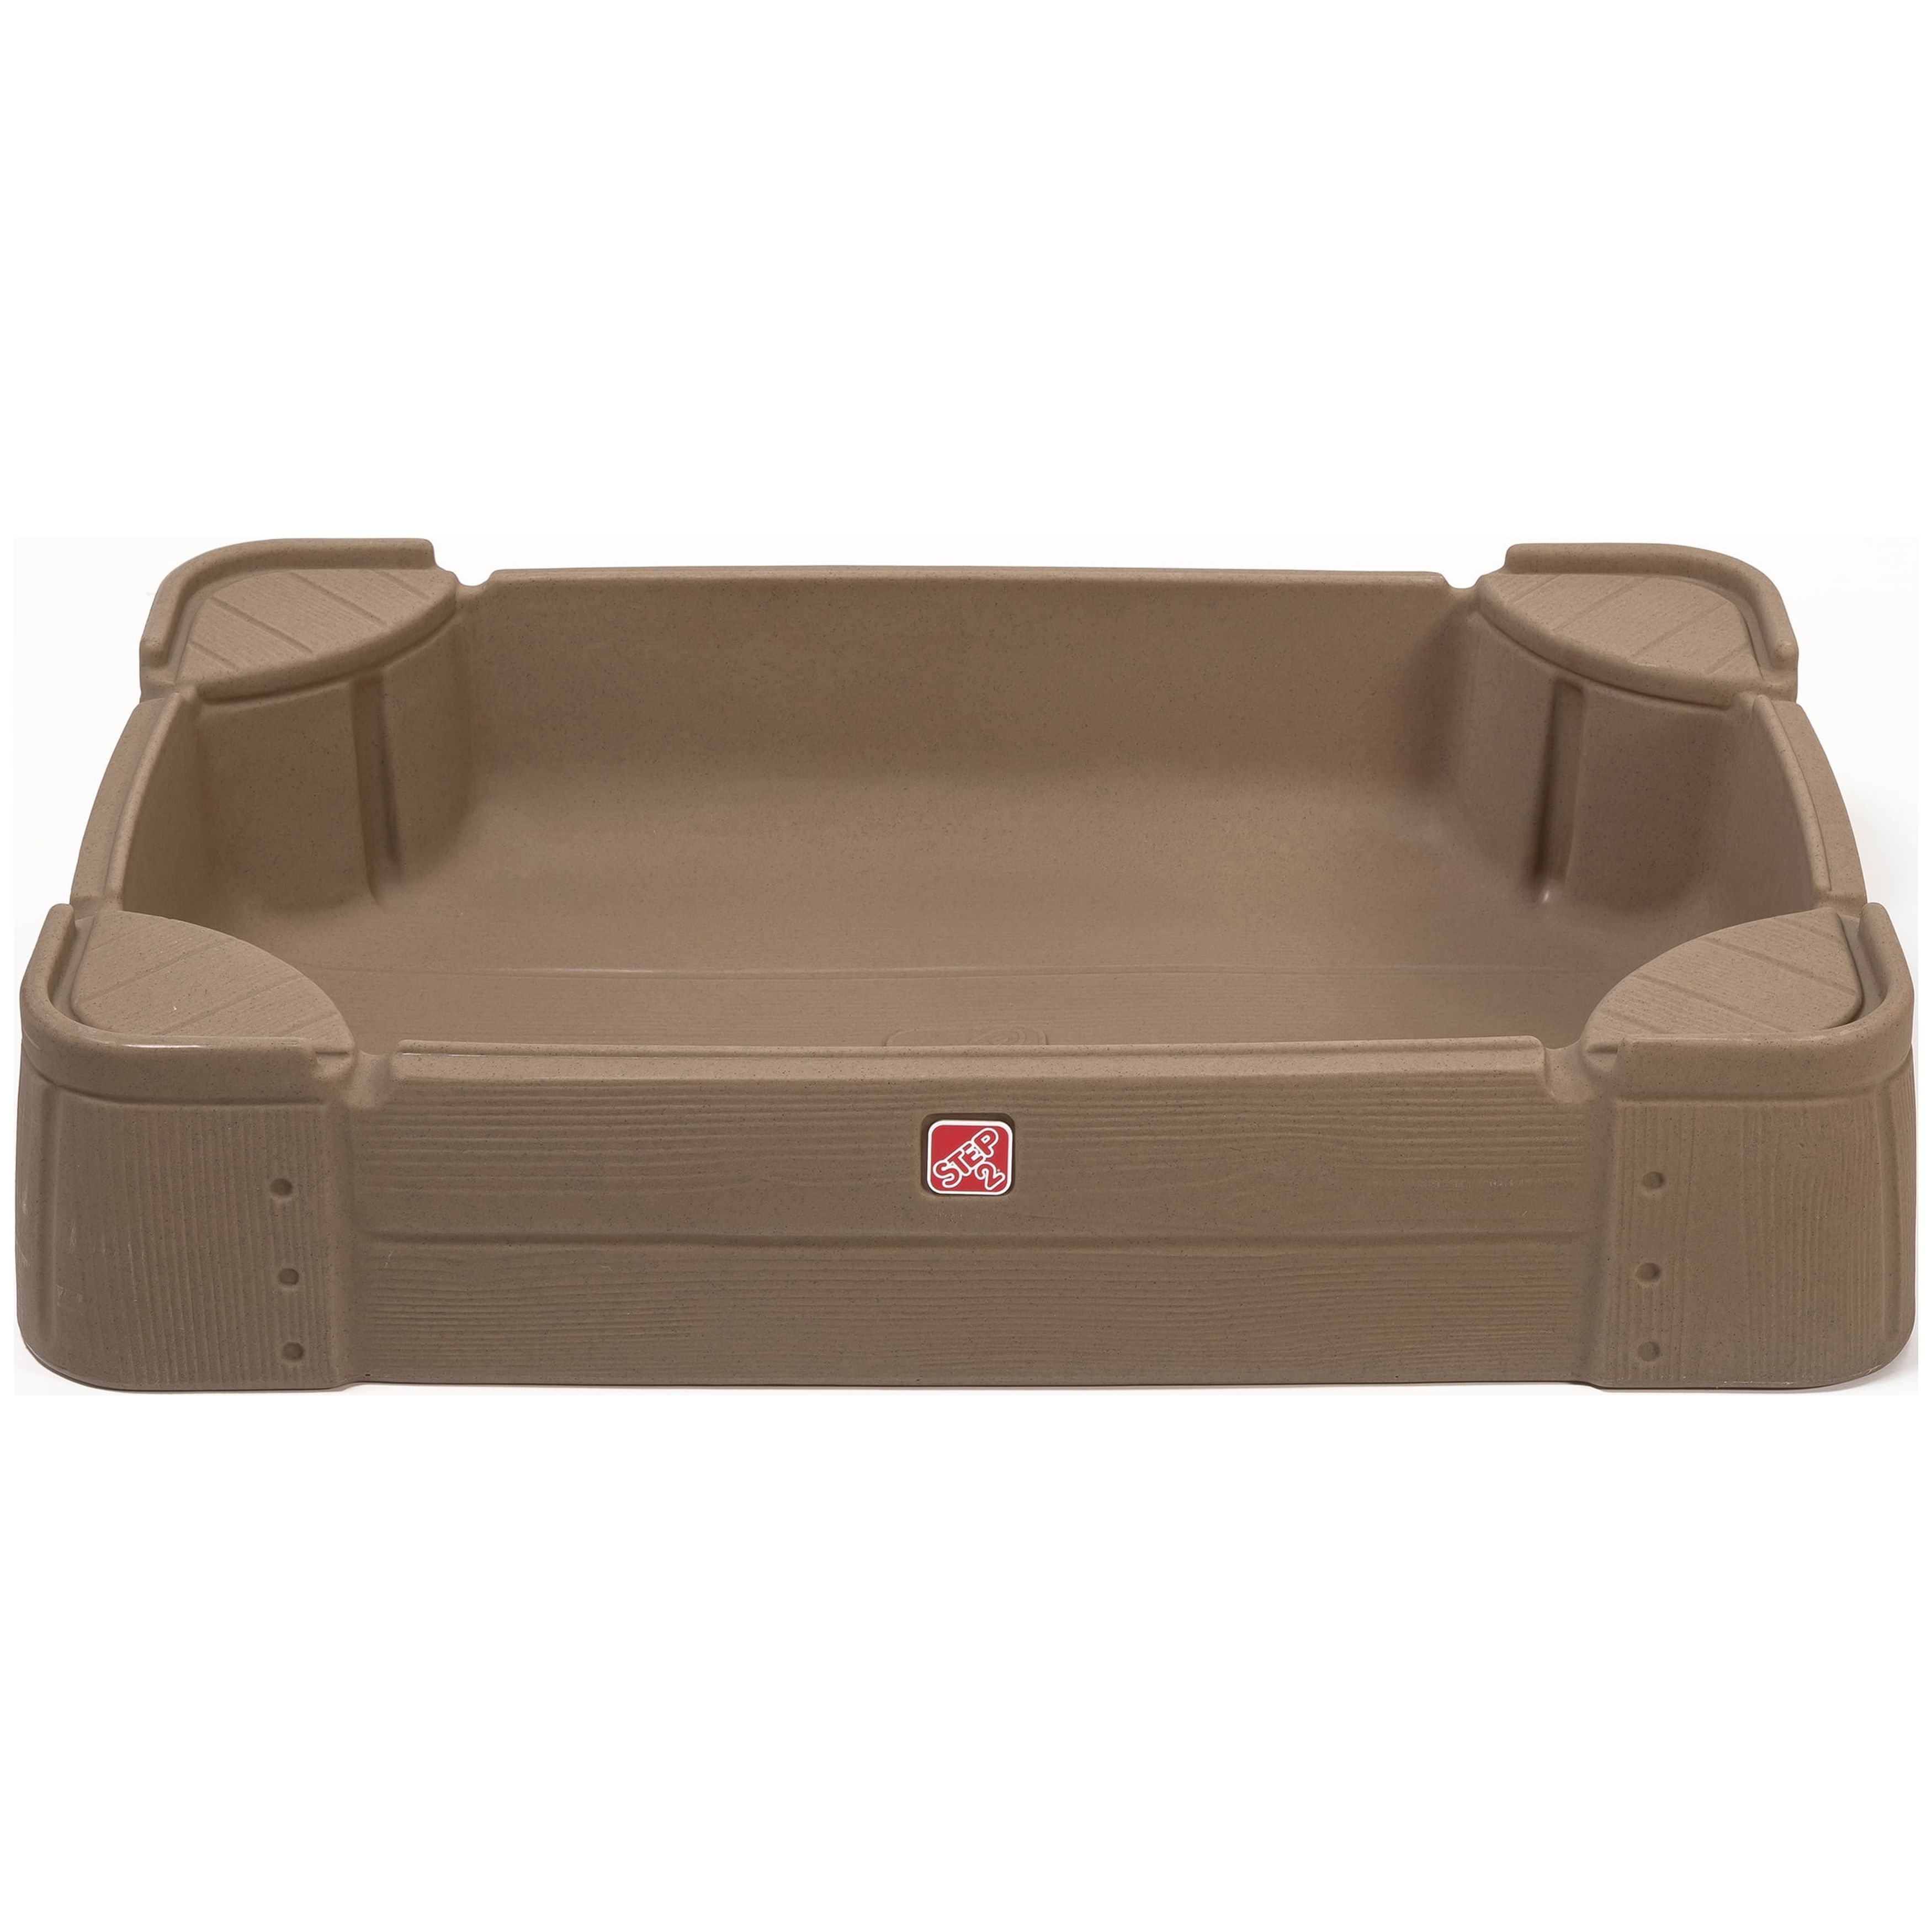 Step2 Play and Store Sandbox Brown Plastic Kids Outdoor Toy with Cover - image 5 of 16